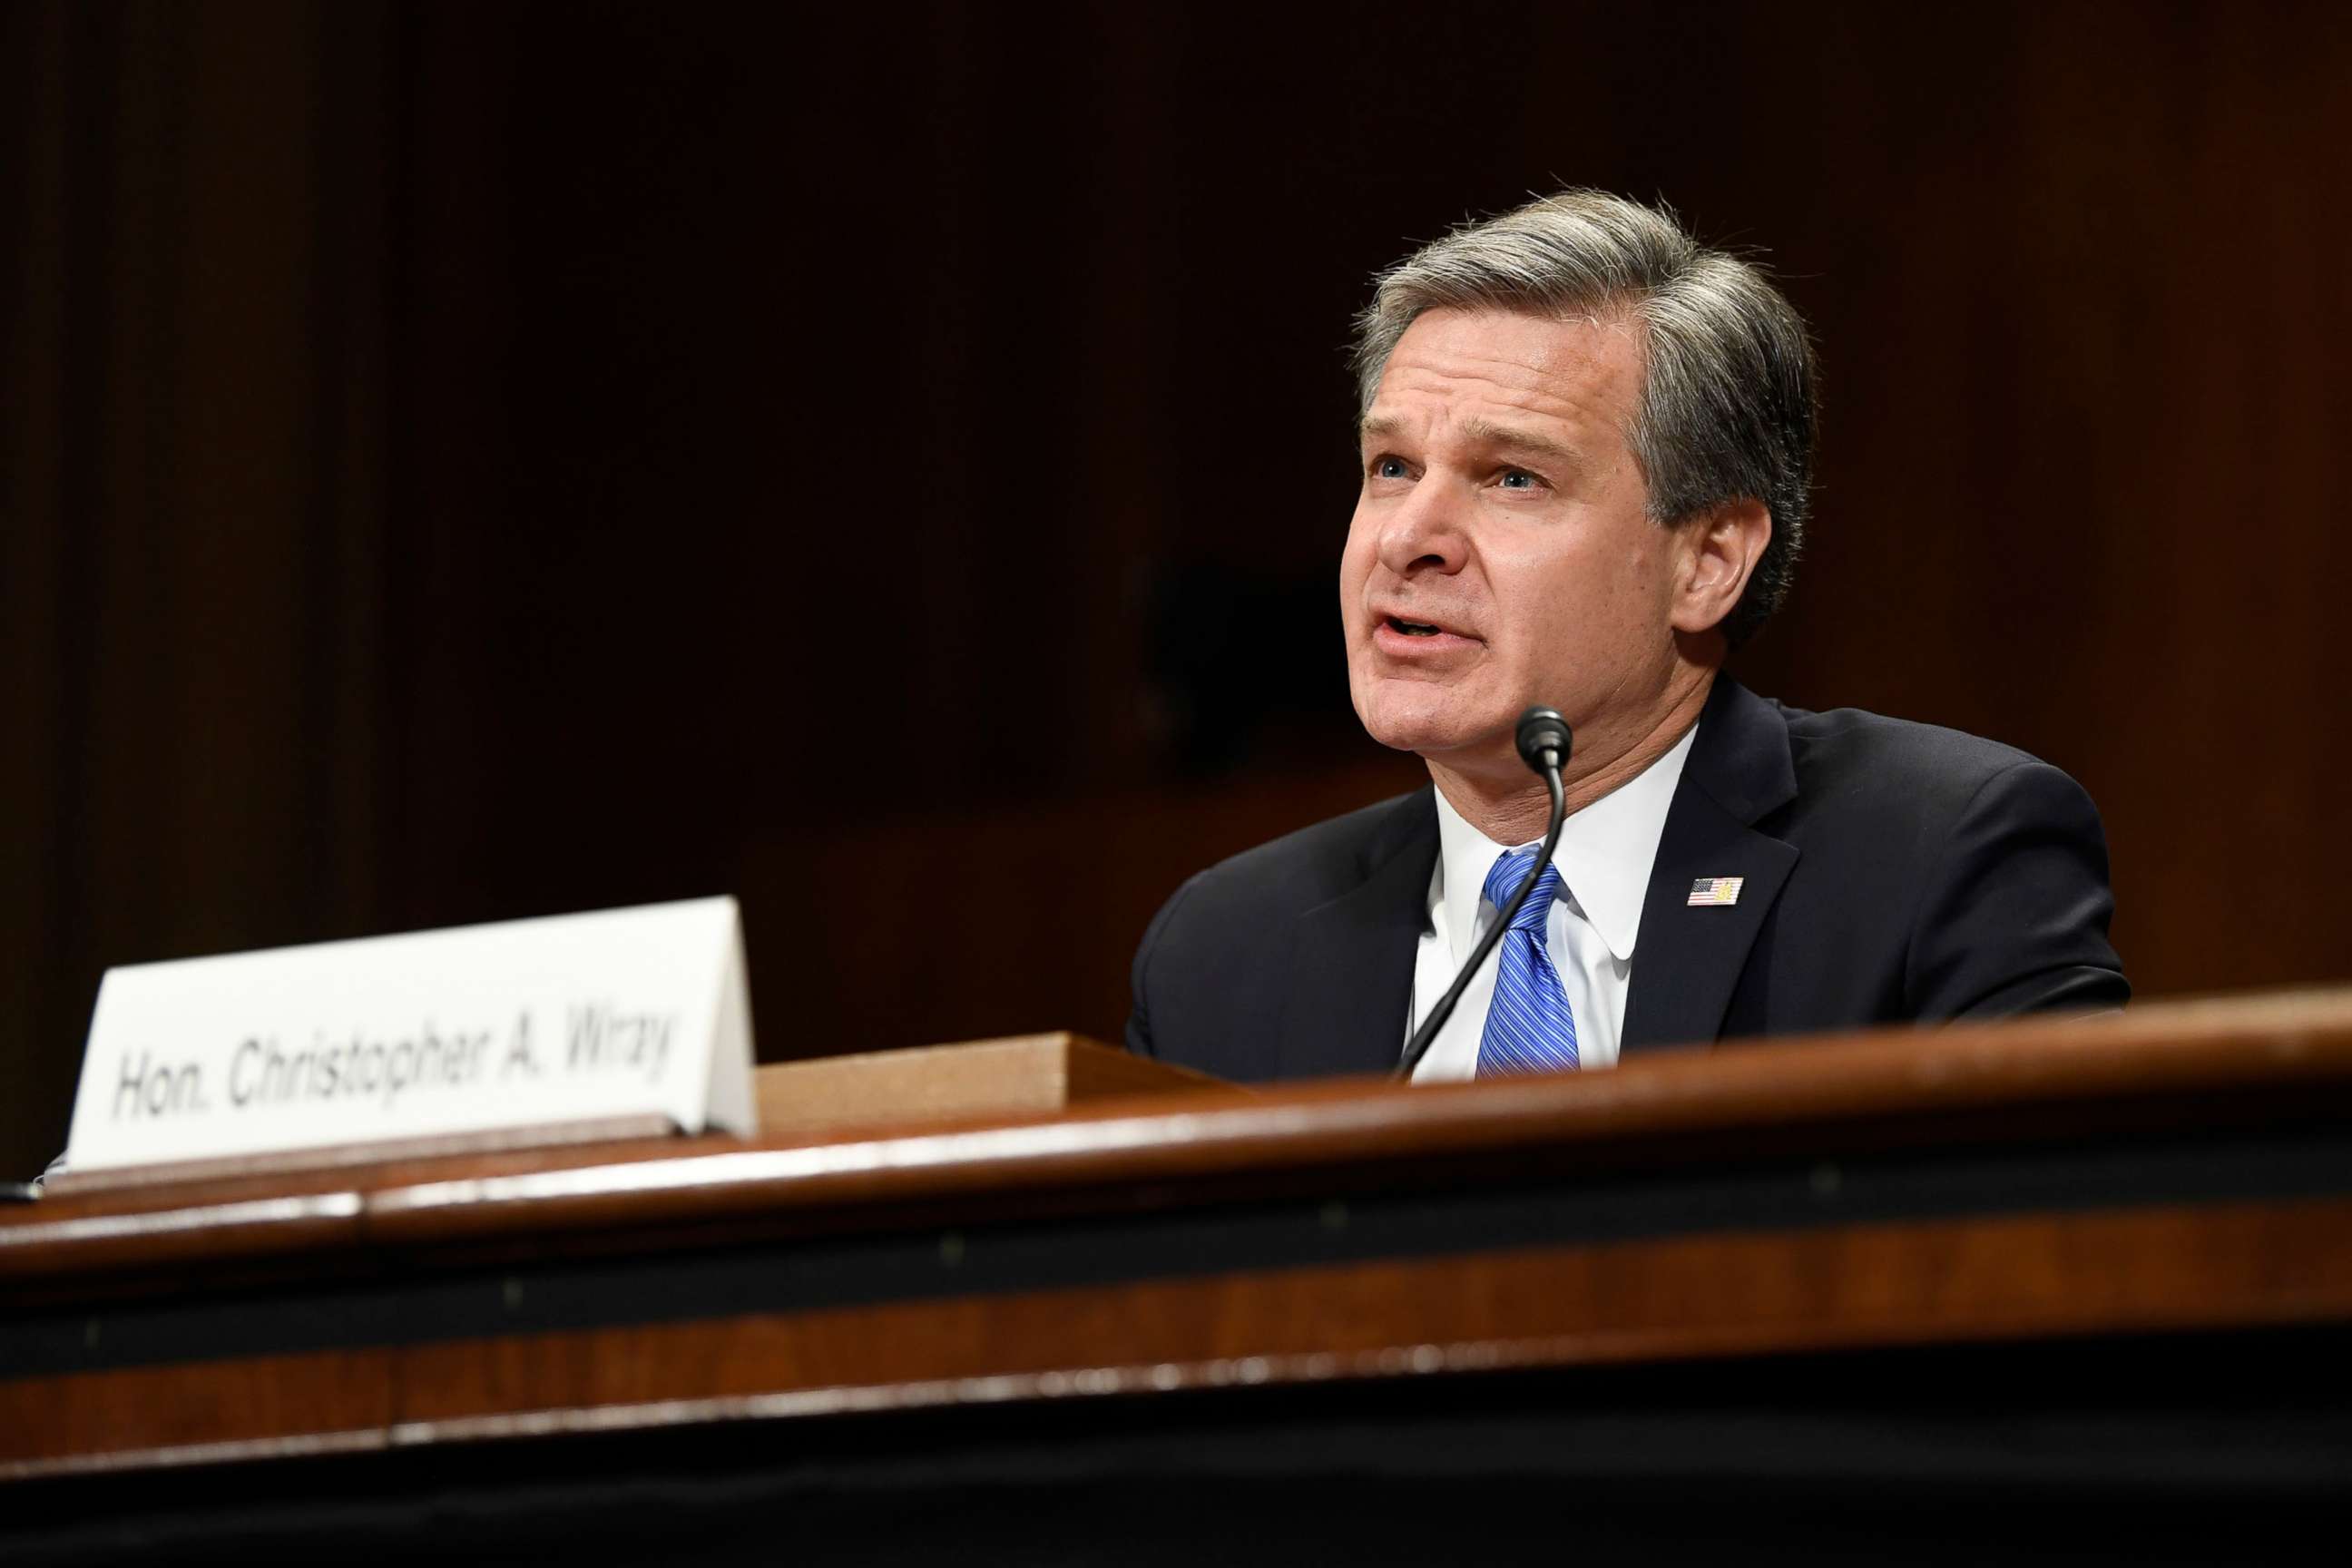 PHOTO: FBI Director Christopher Wray testifies before the Senate Judiciary Committee on Capitol Hill in Washington, July 23, 2019.